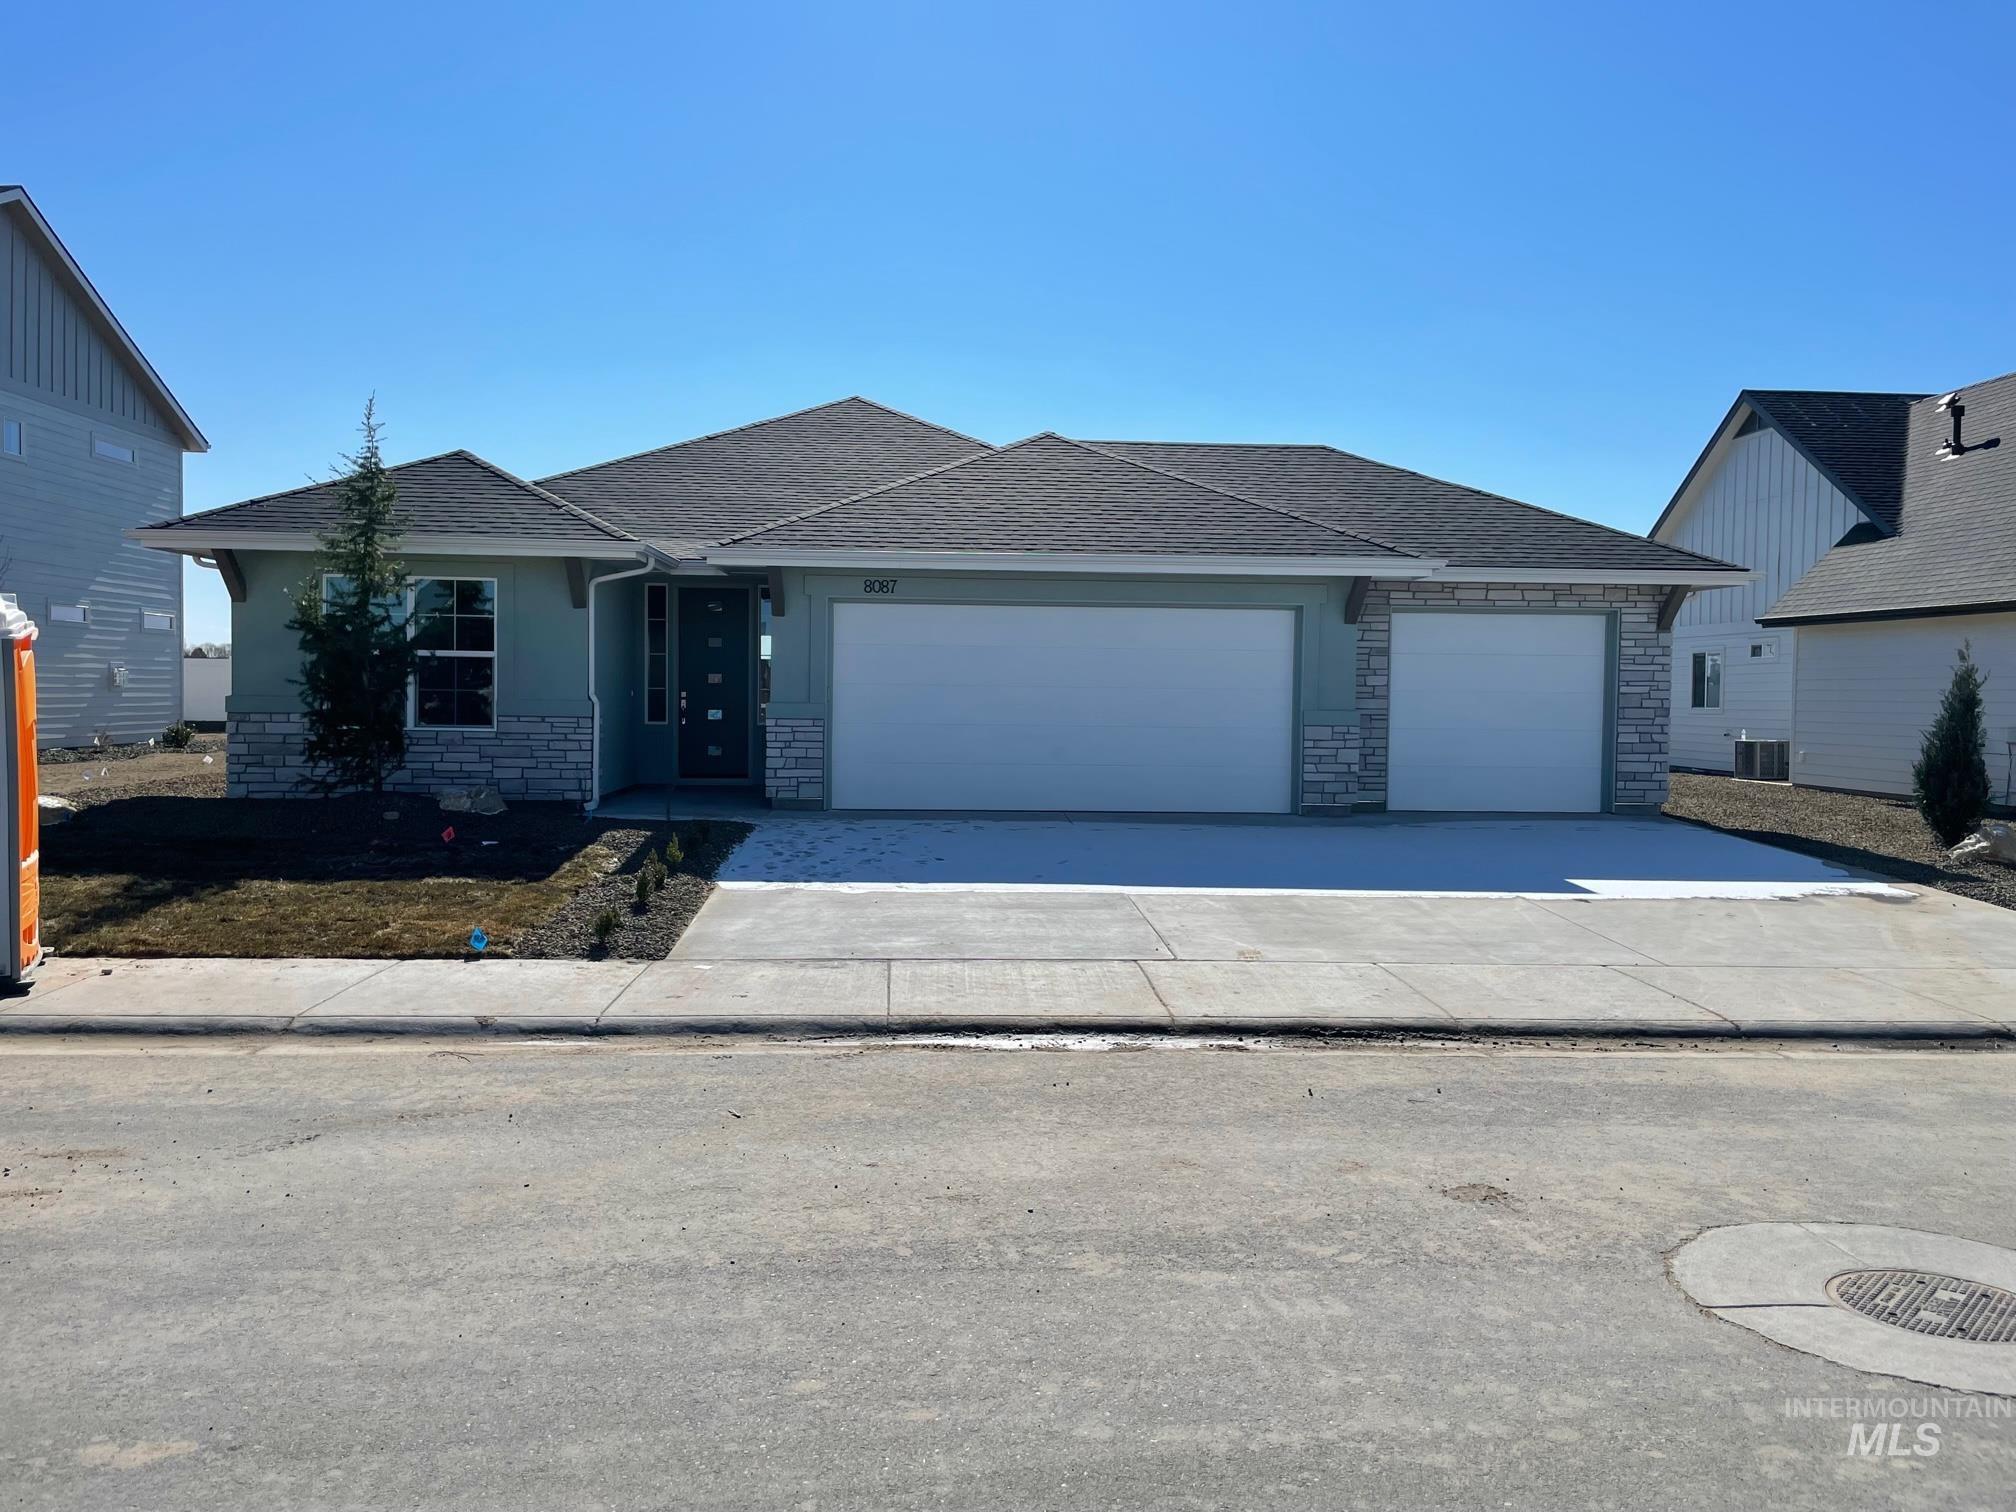 8087 Tandy Cove St., Middleton, ID 83644